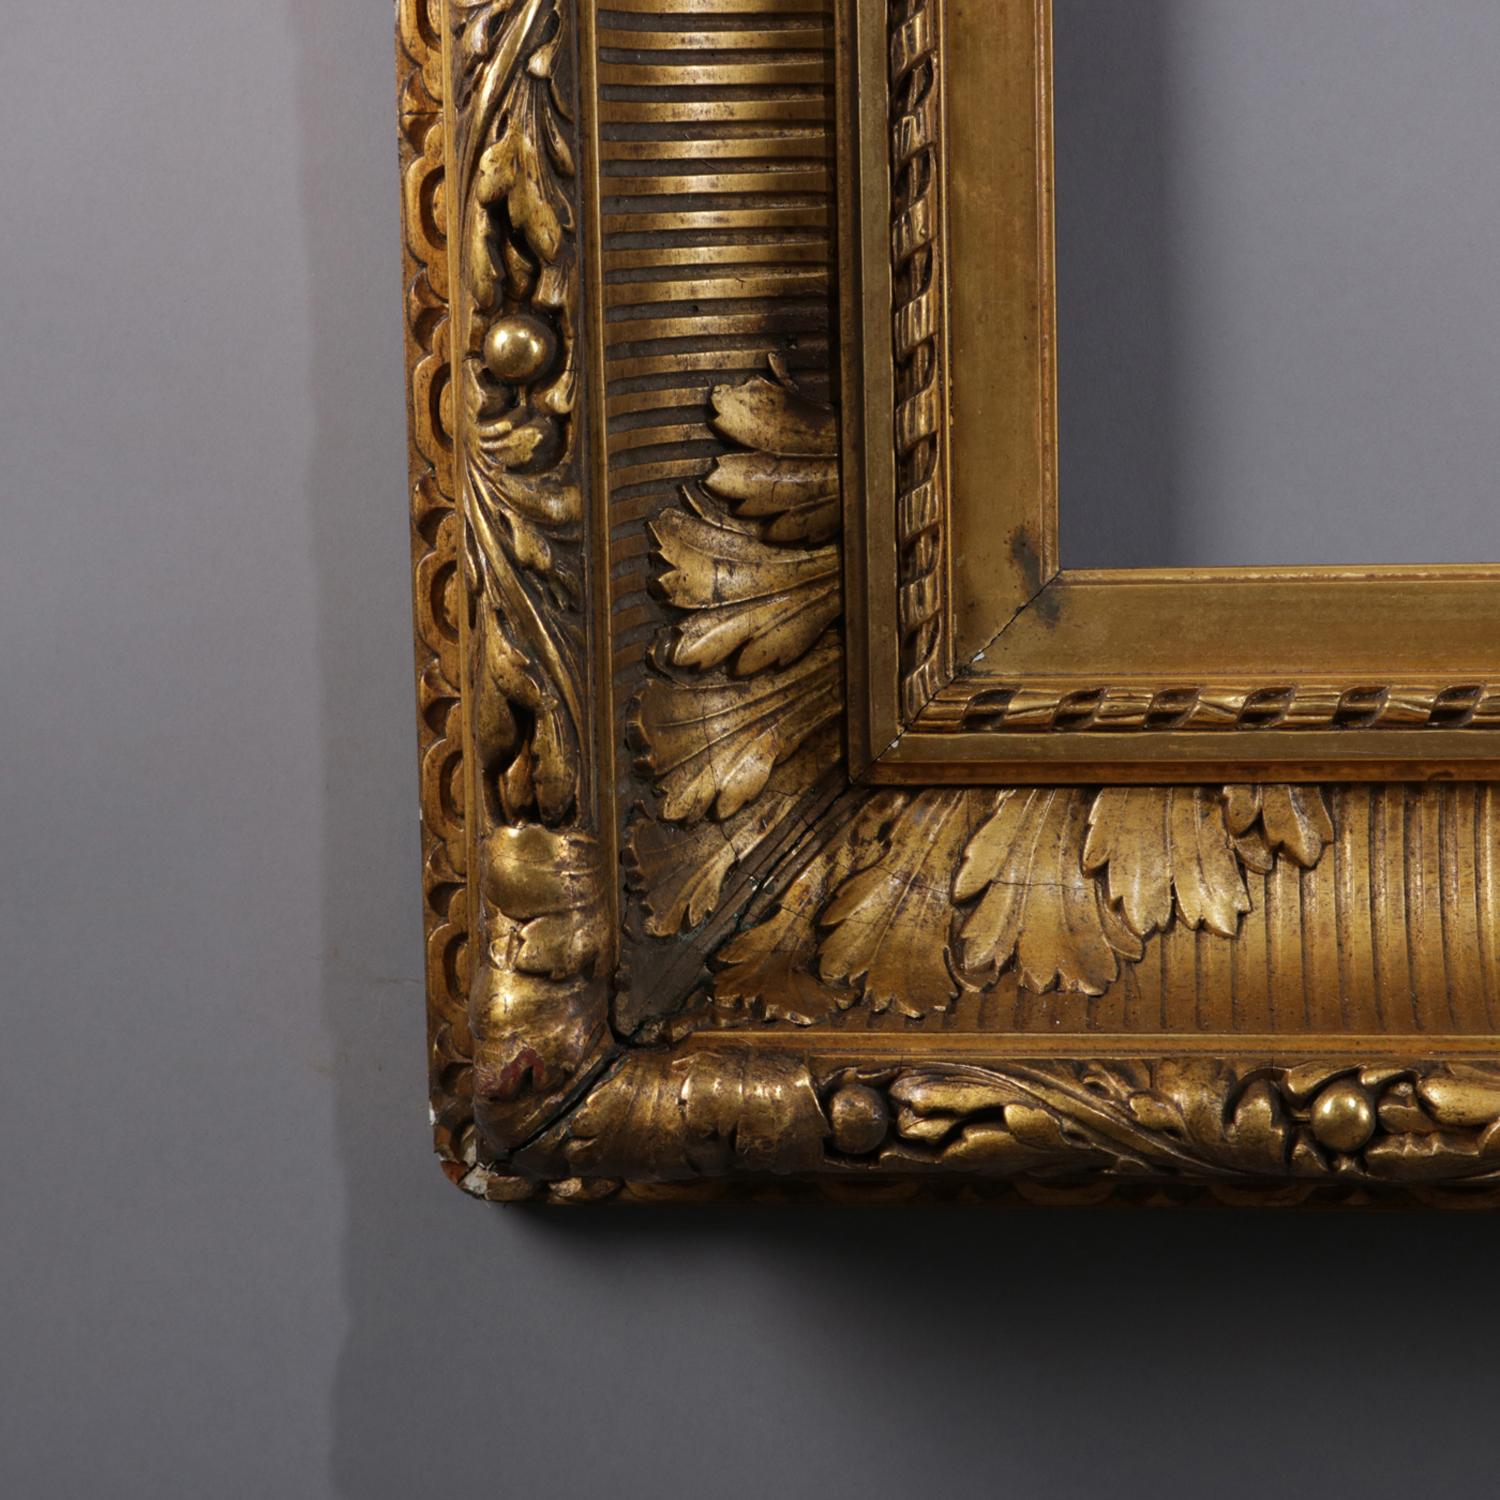 An oversized Hudson River School first finish giltwood museum frame features cove molded form with reeding and acanthus foliate corners, circa 1890.

Measures: Overall 45.5